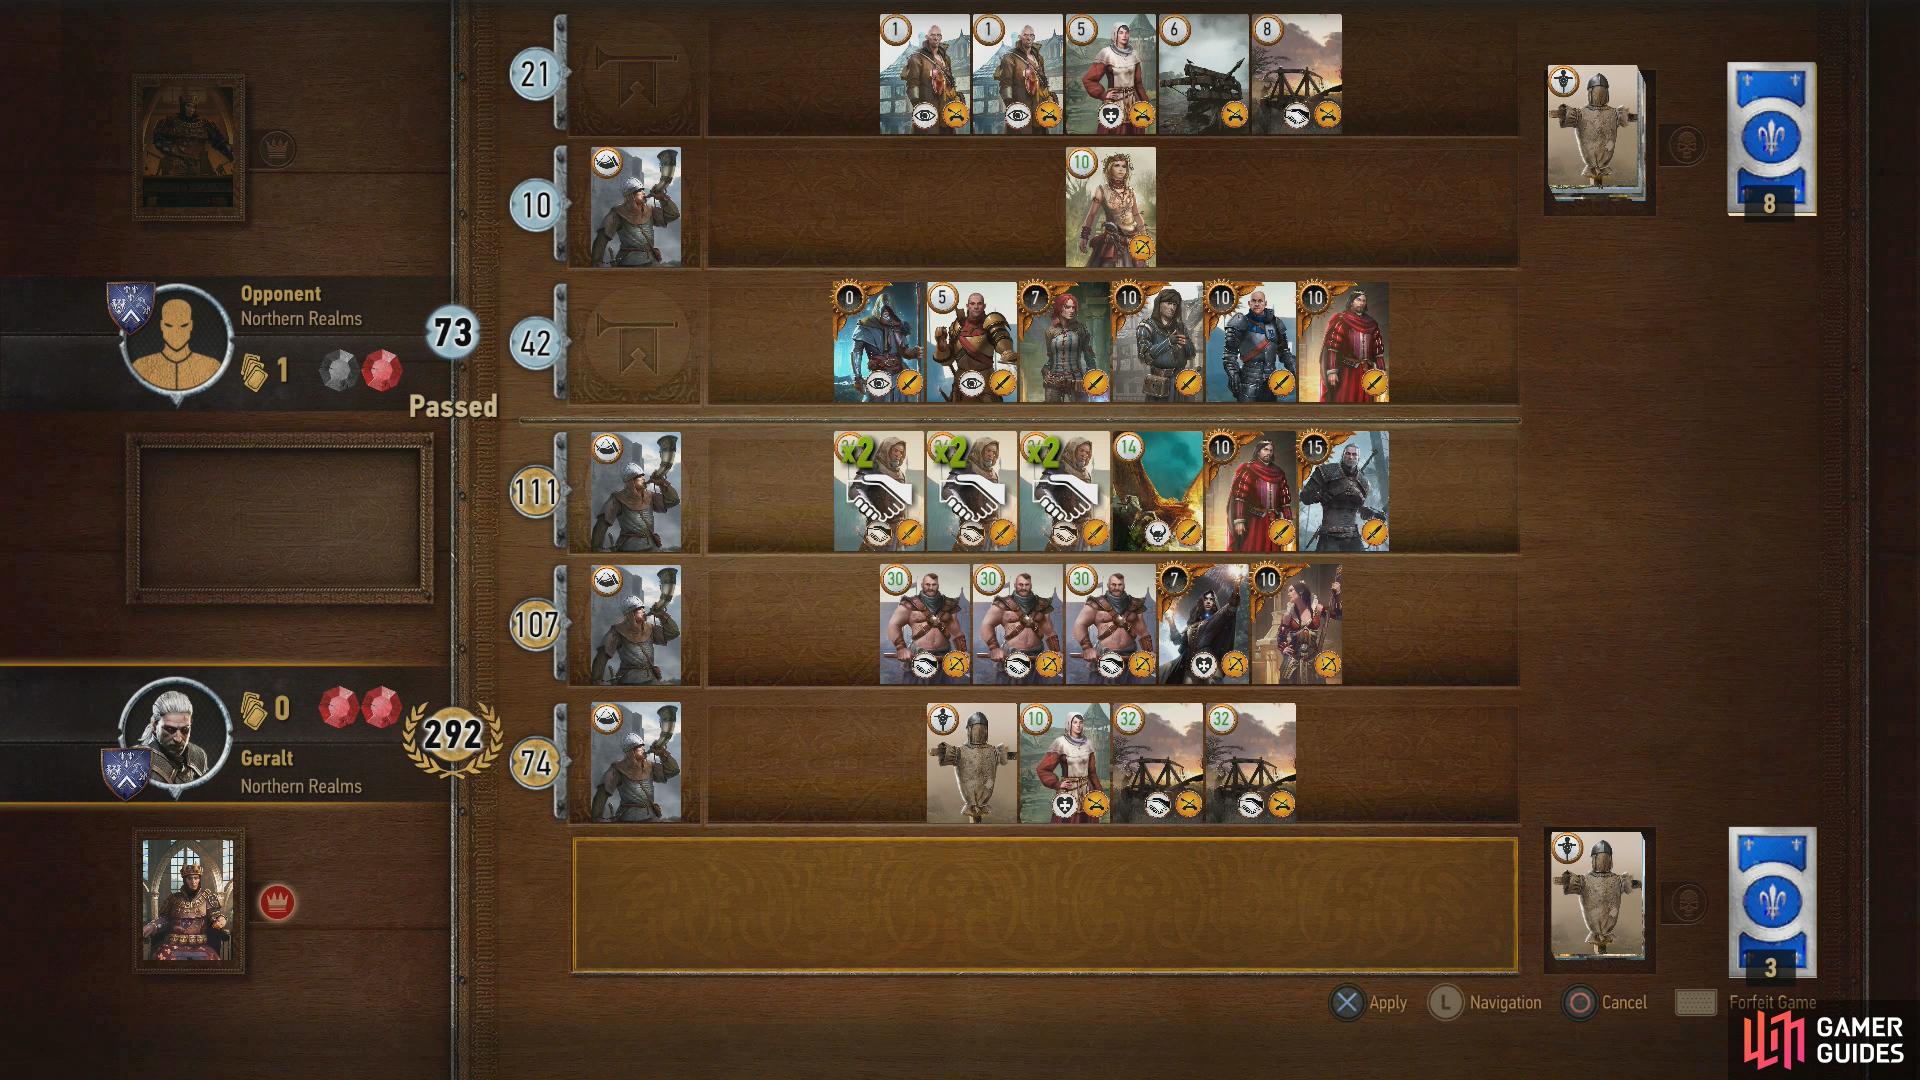 To expand your Skellige deck, you'll need to defeat players across Toussaint.